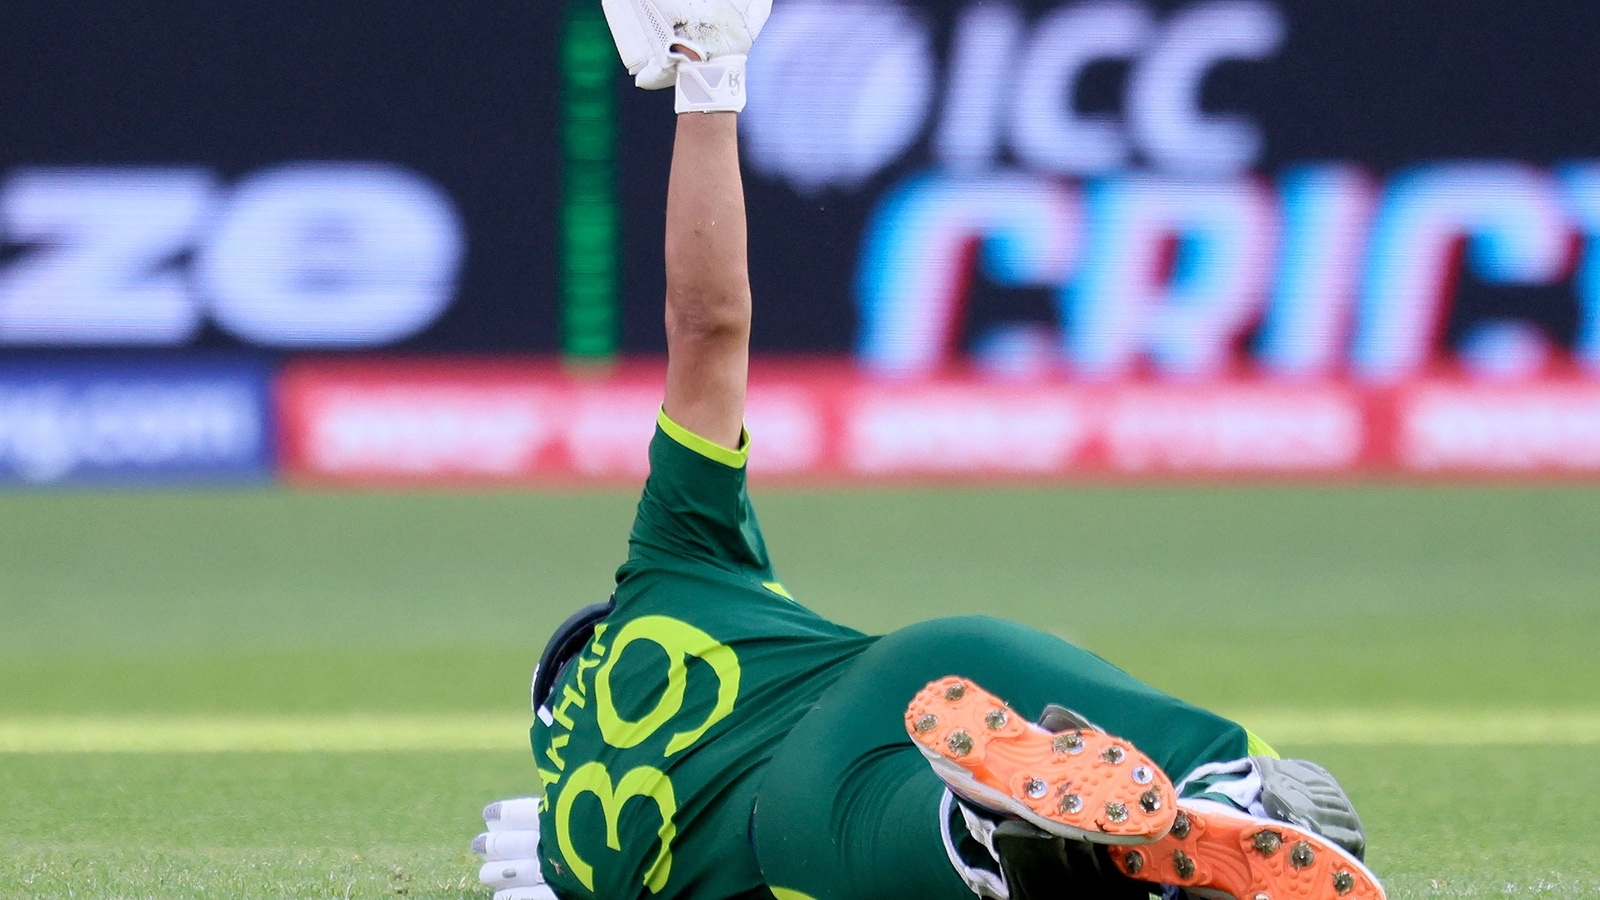 fakhar-zaman-understood-the-risks-pakistan-team-doctor-explains-batter-s-injury-situation-in-t20-world-cup-2022